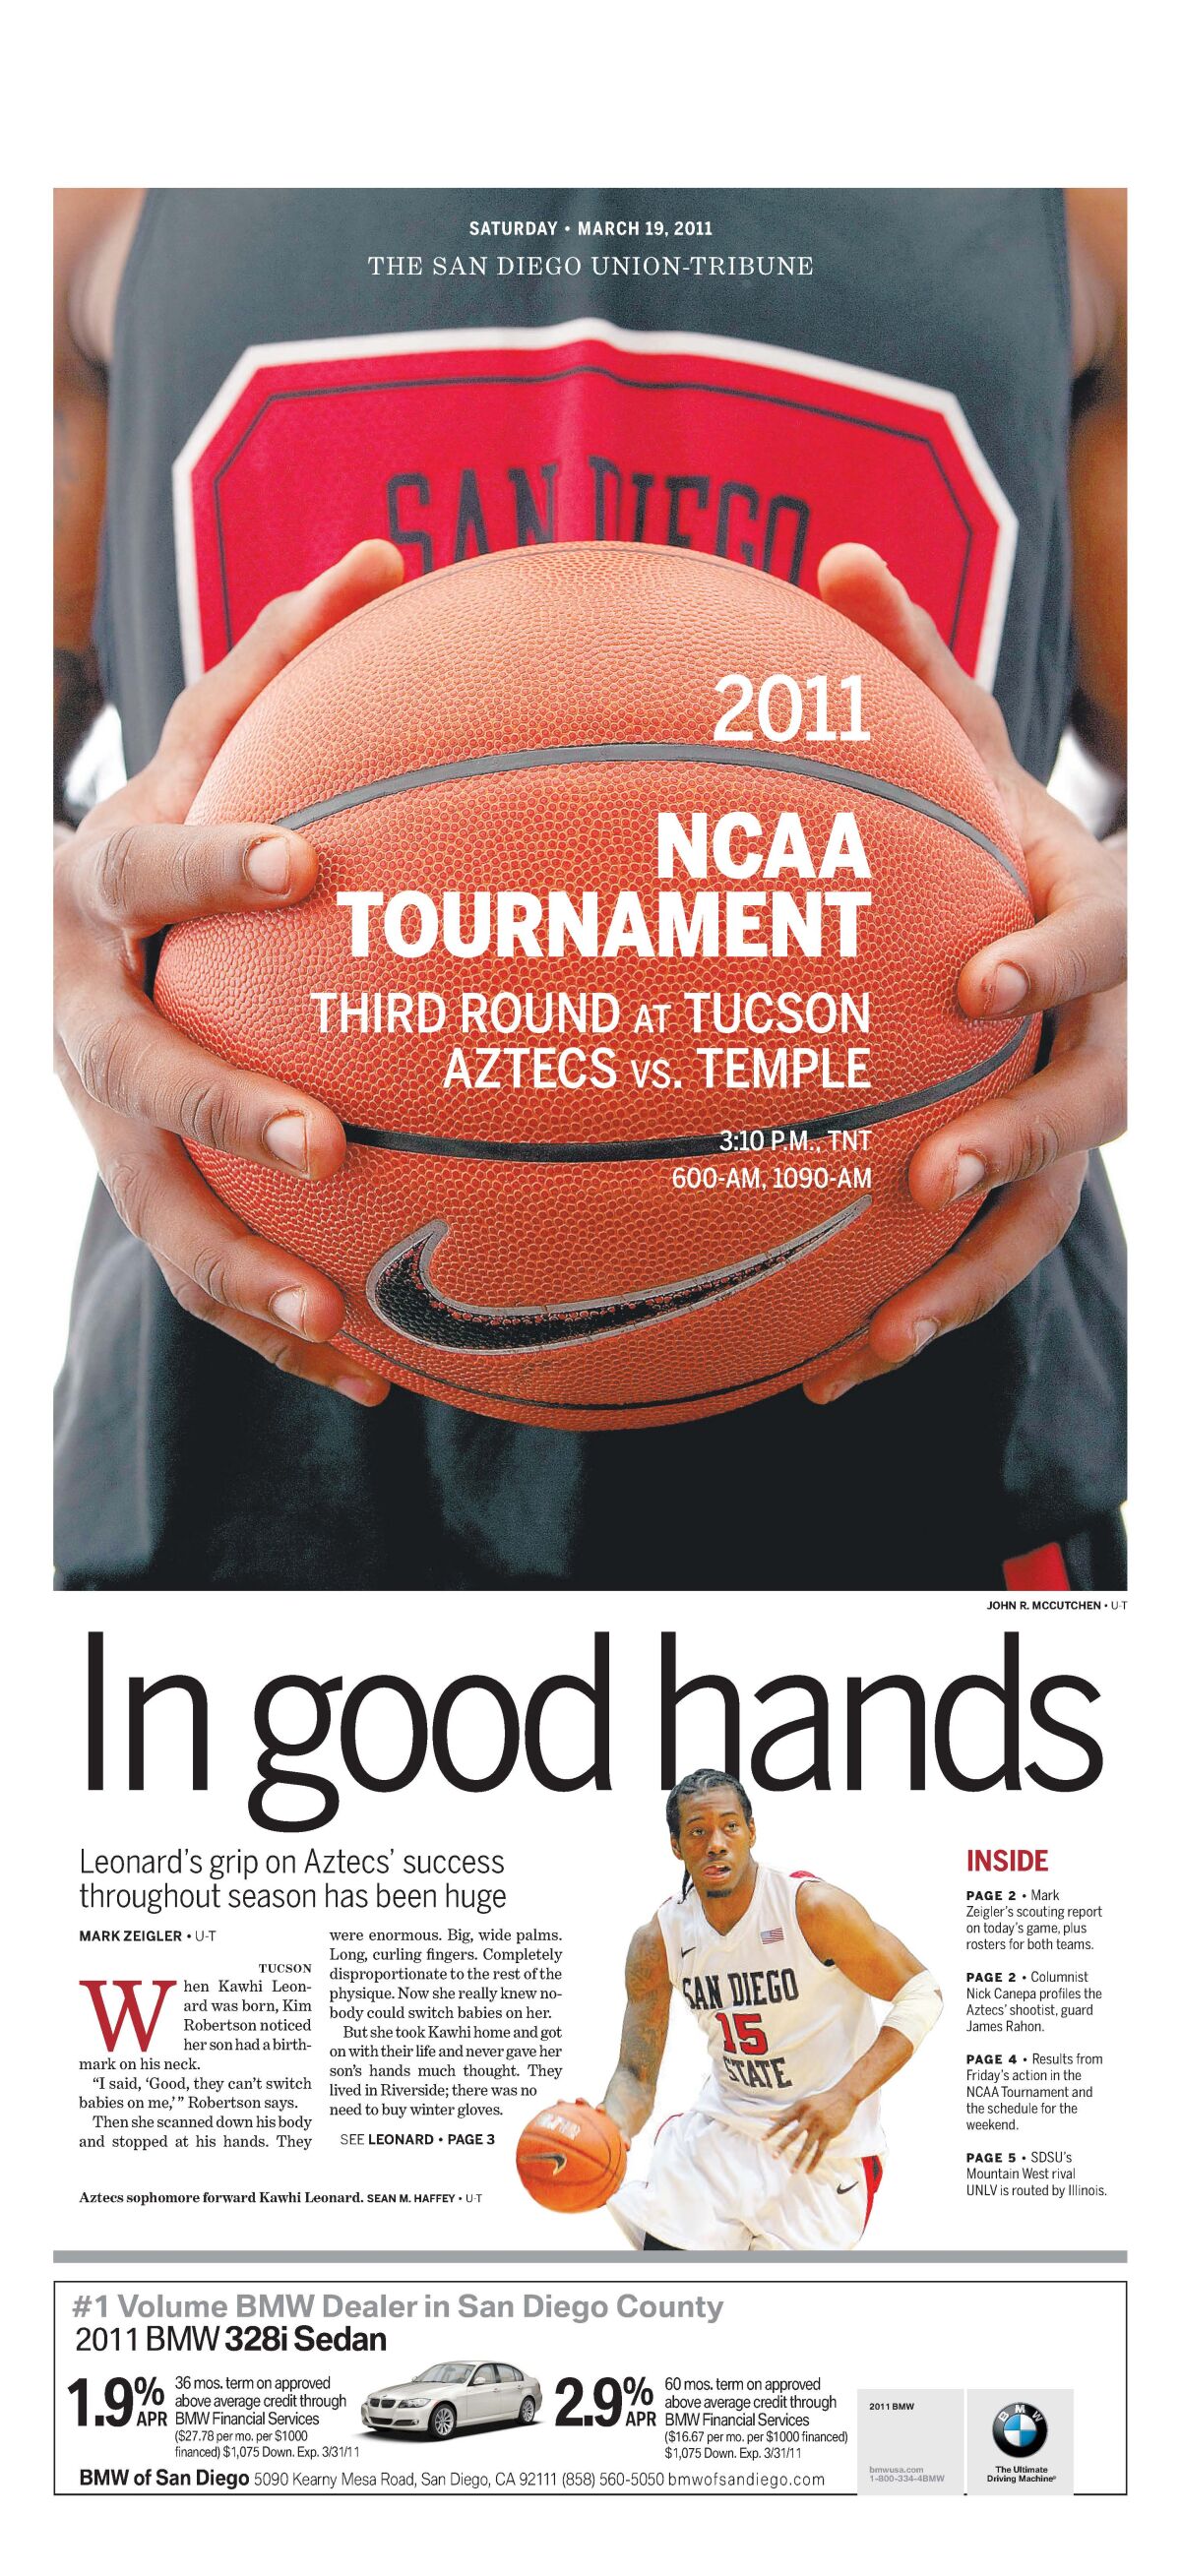 March 19, 2011 Sports cover page